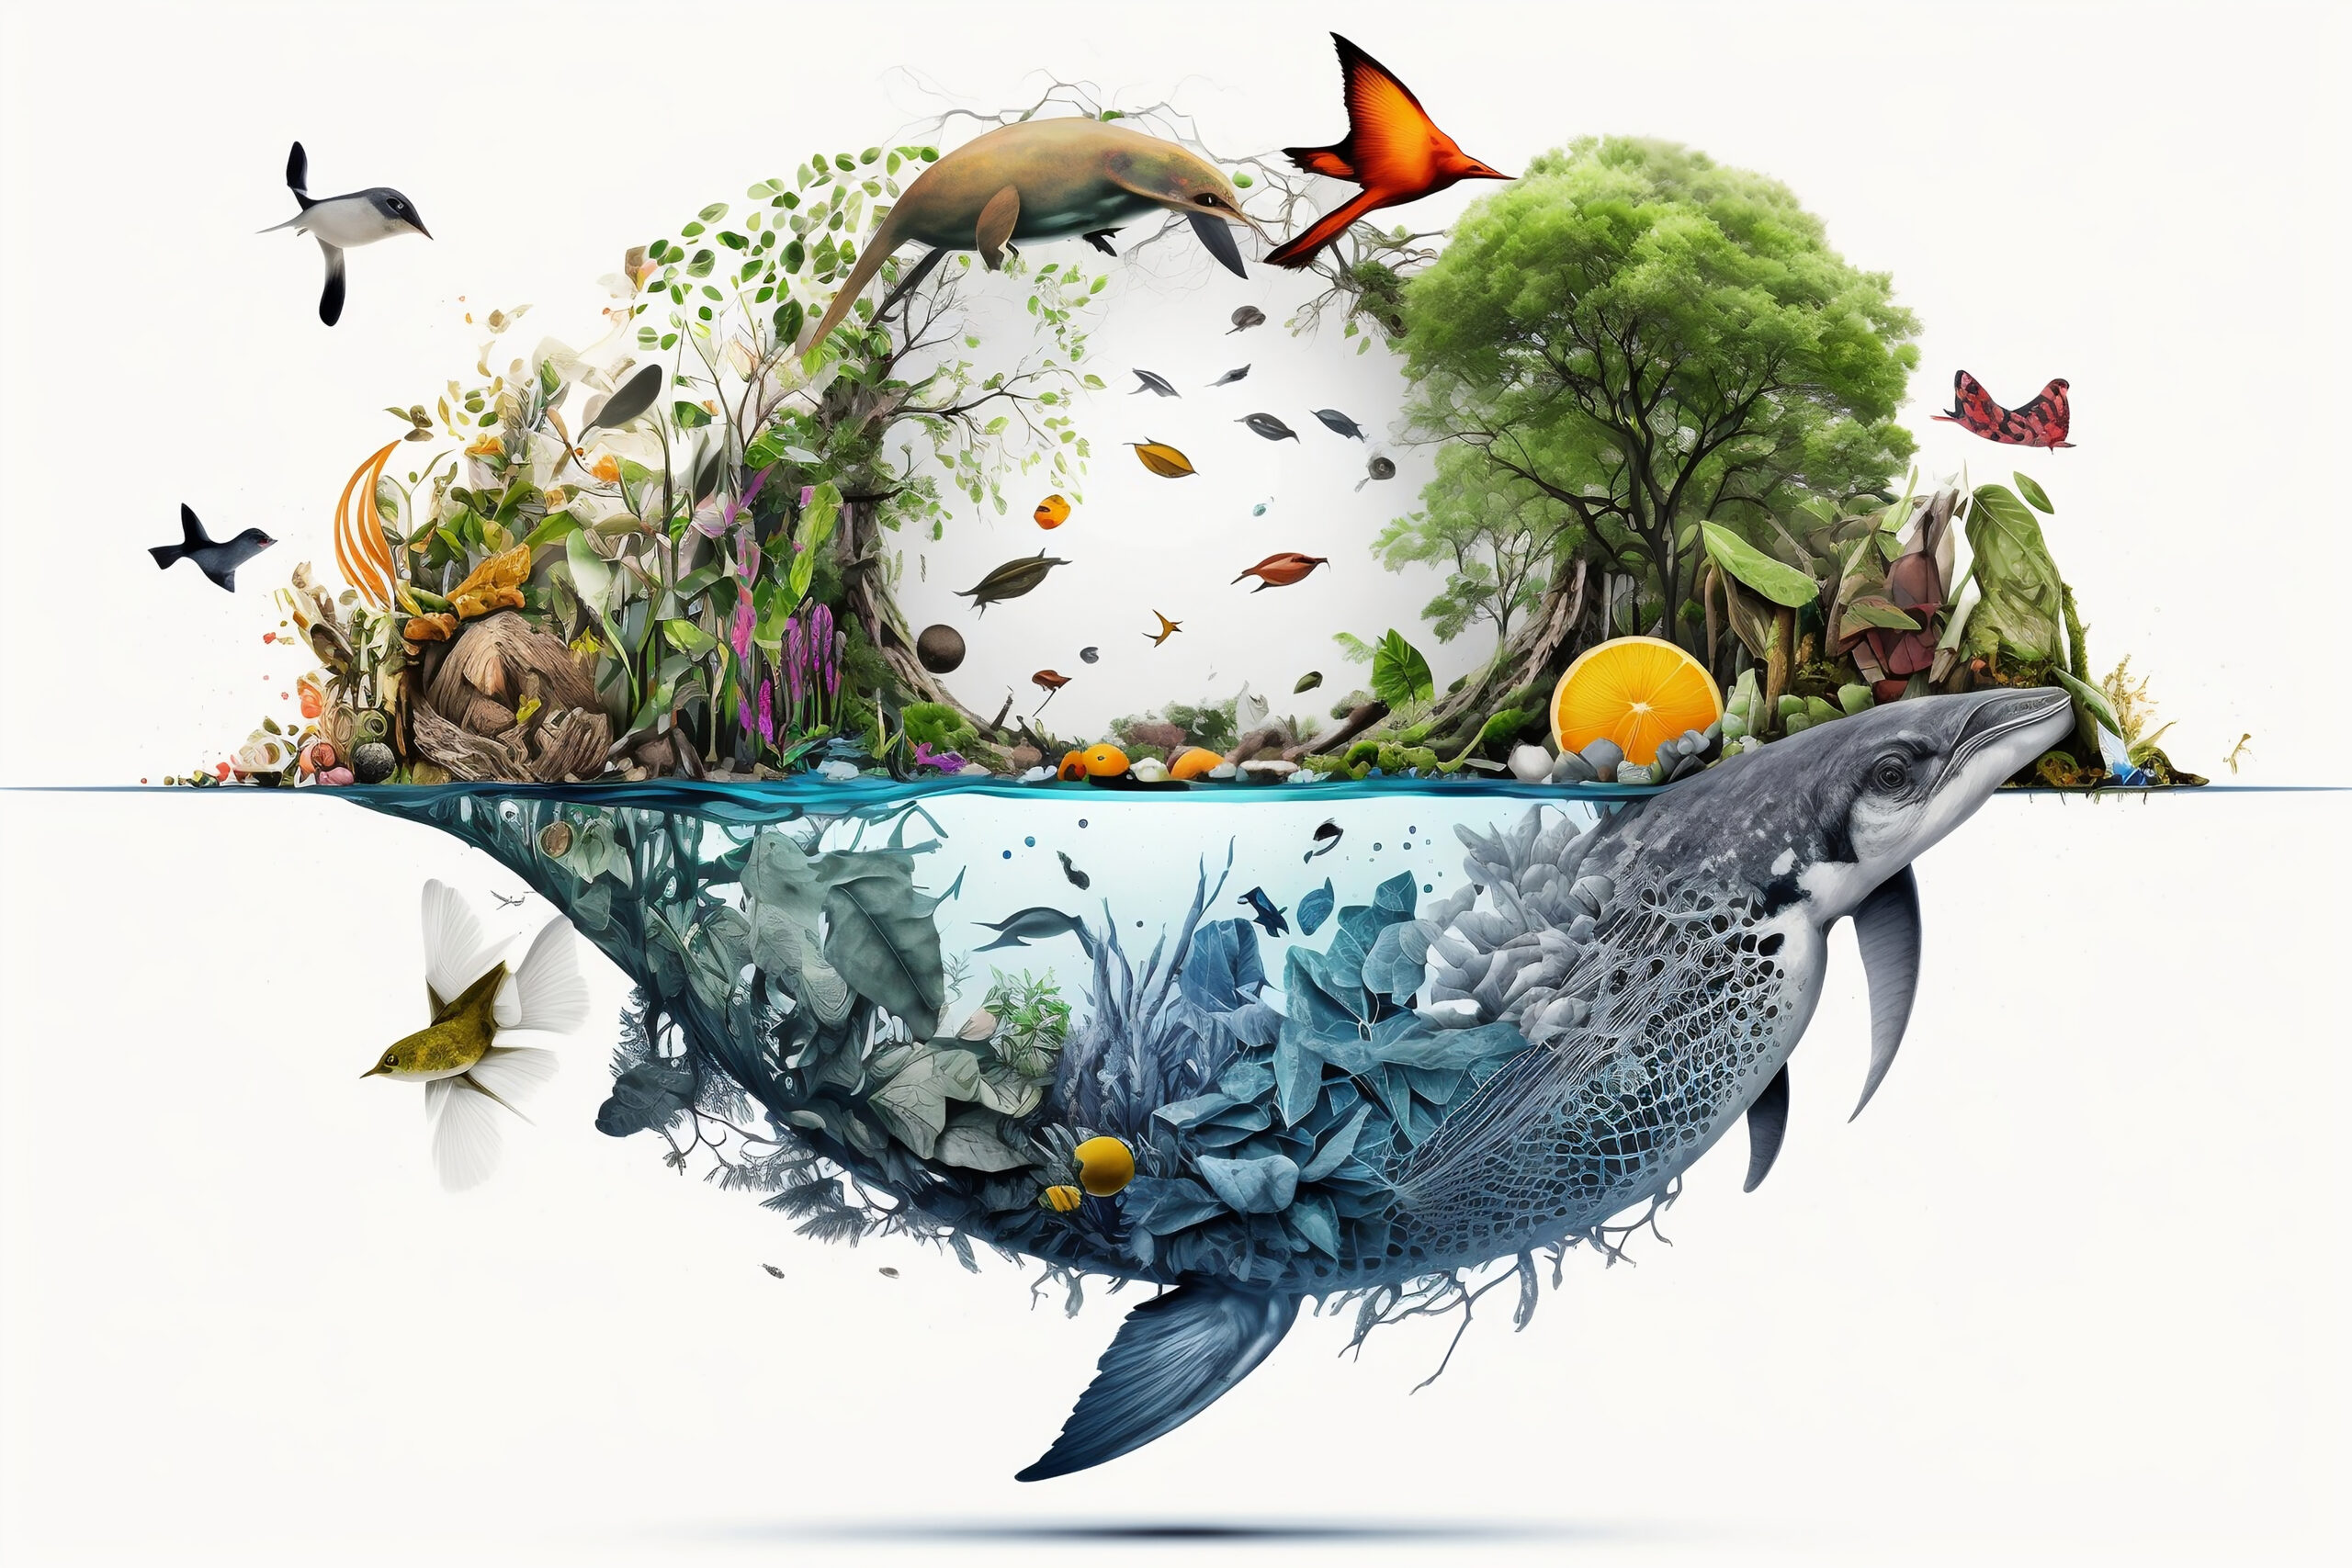 creative collage of biodiversity, ecosystem and protection of nature and water environment. Concept of saving the planet